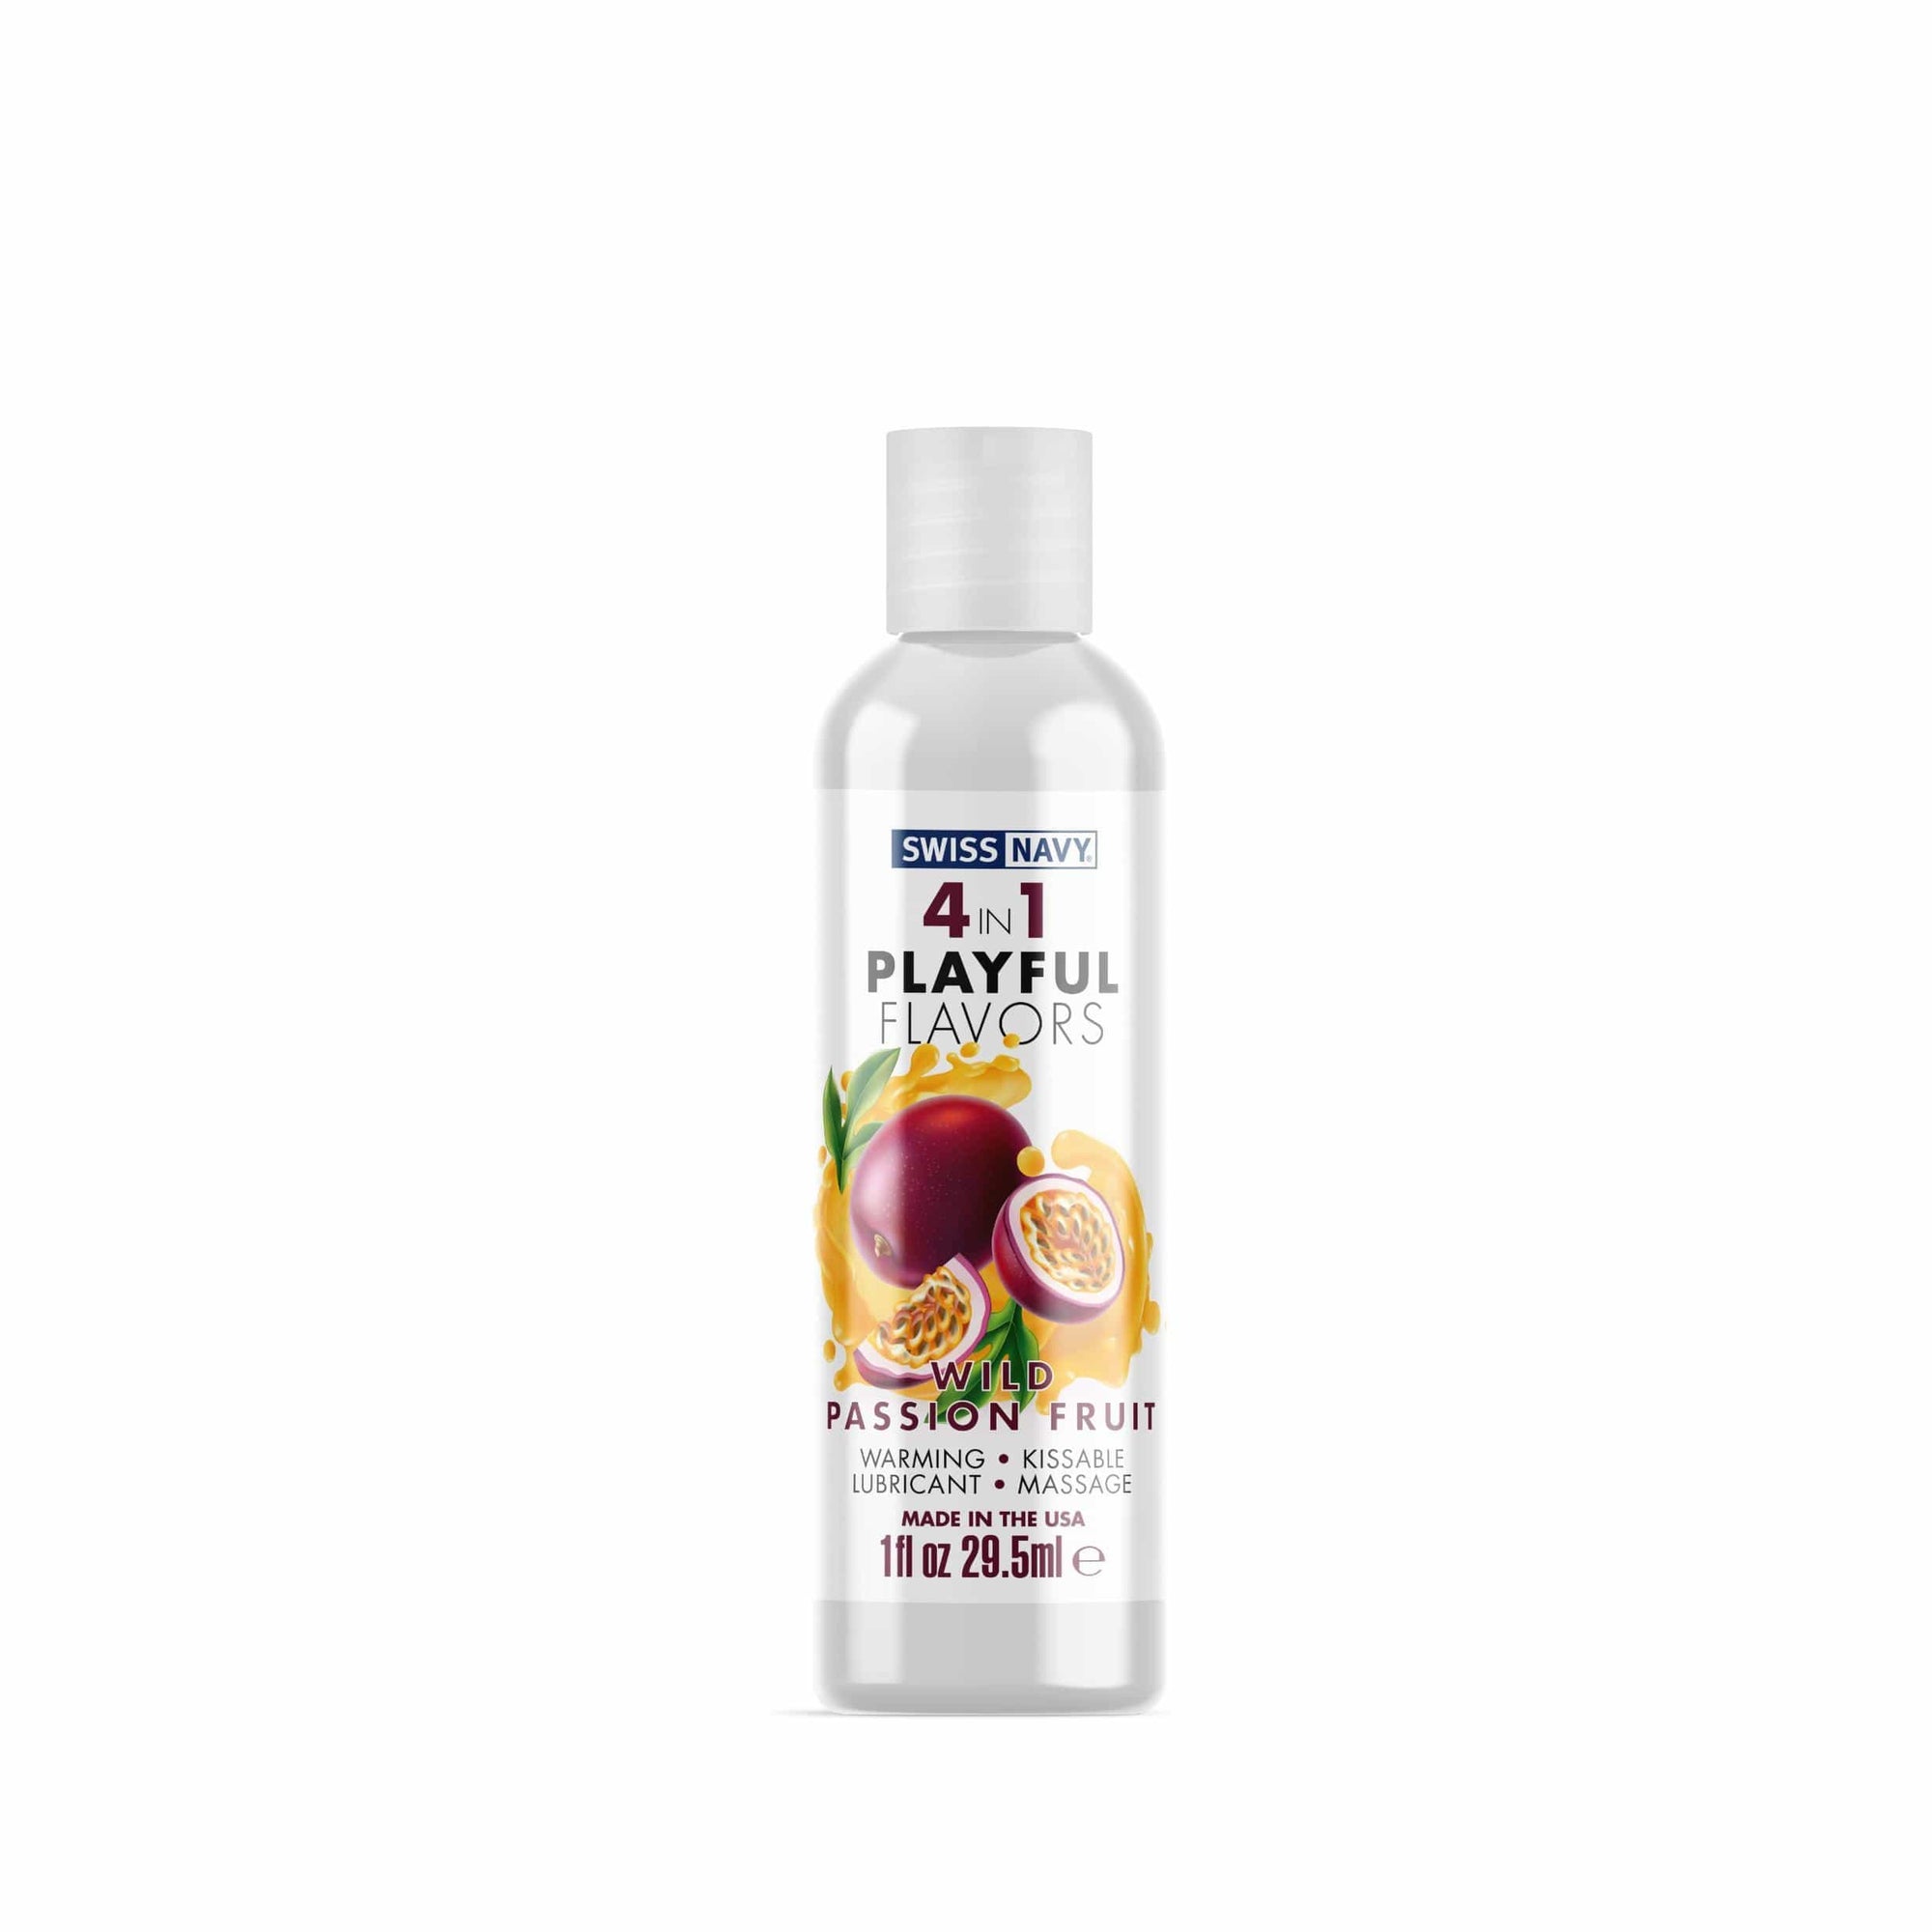 swiss navy 4 in 1 playful flavors wild passion fruit 1 fl oz